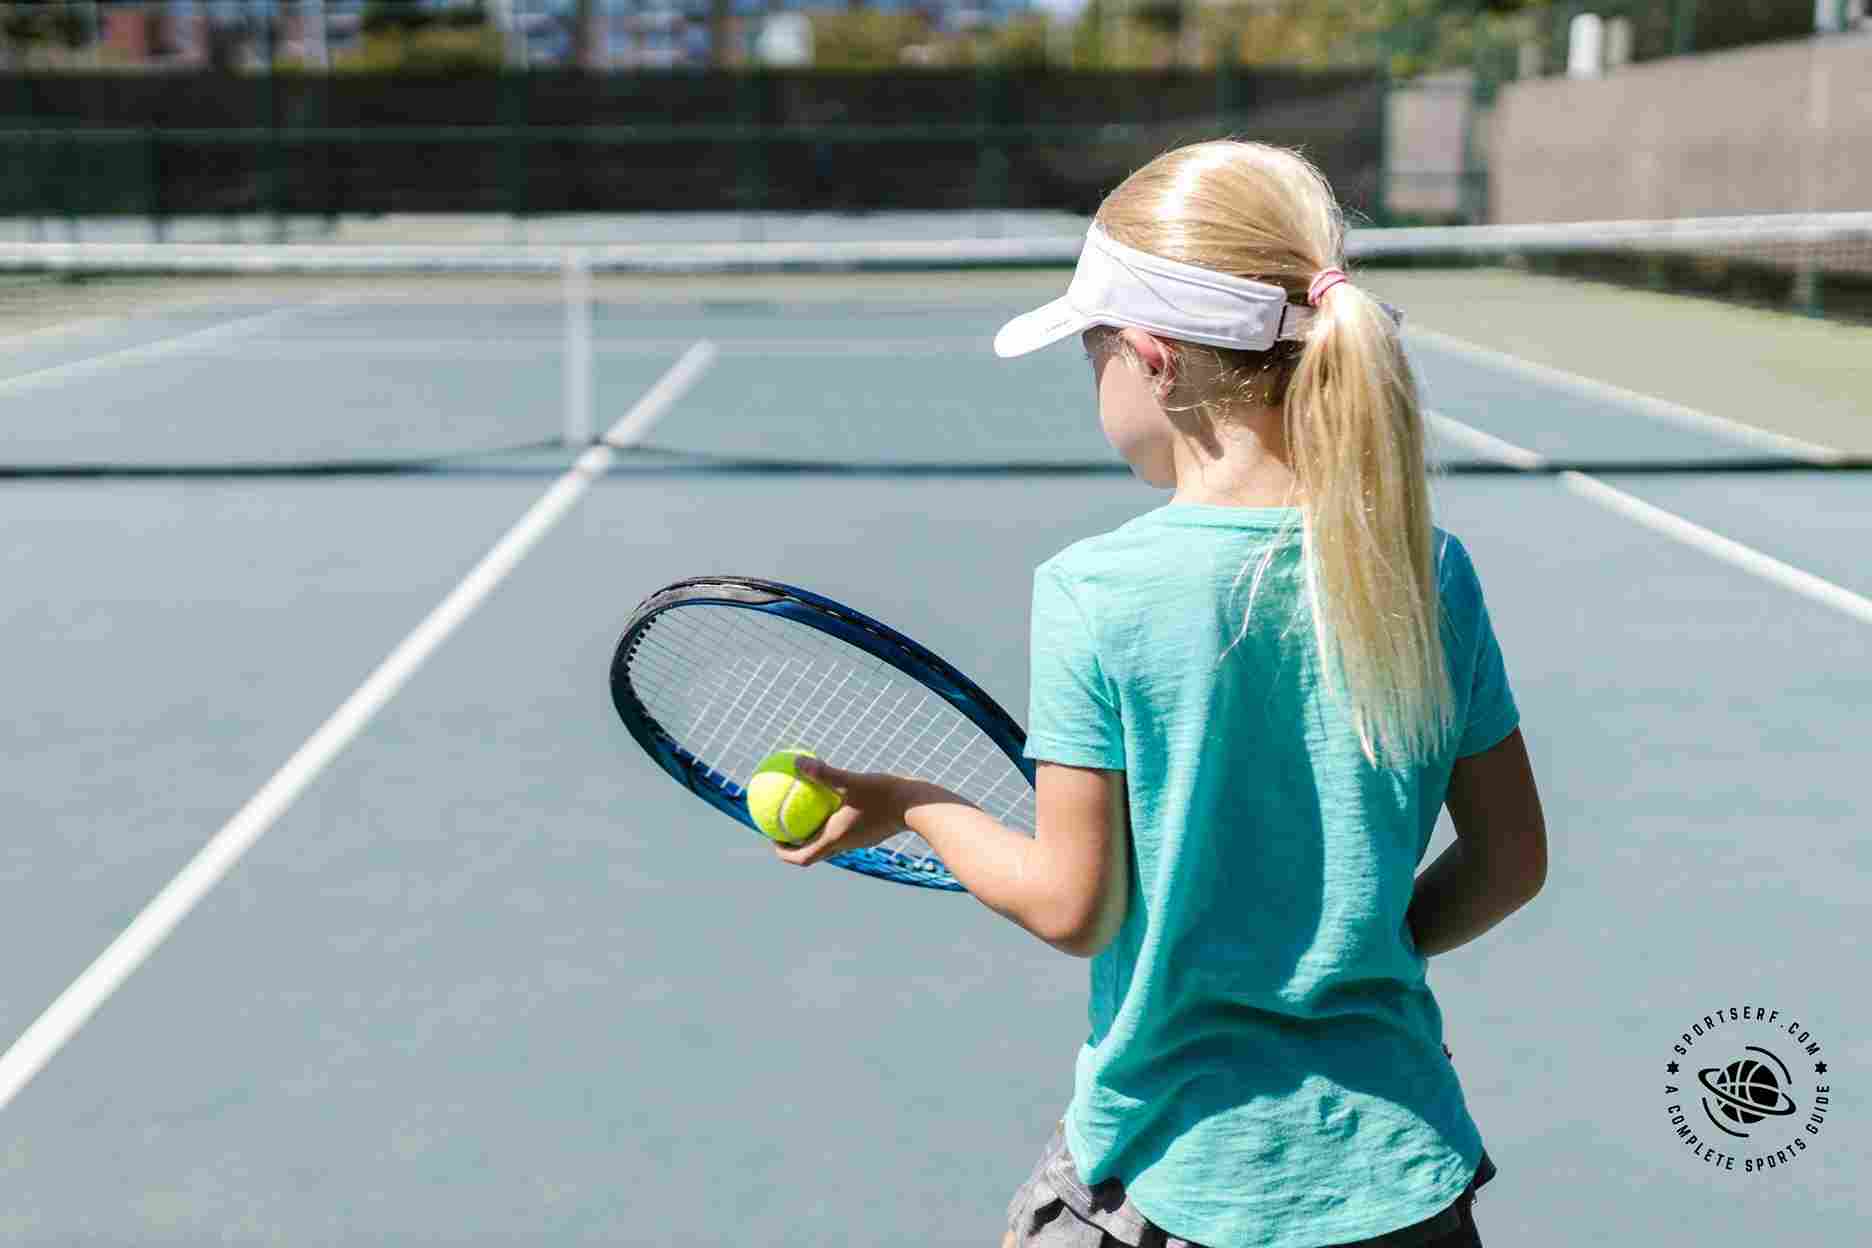 The Most Common Tennis Rules and Regulations